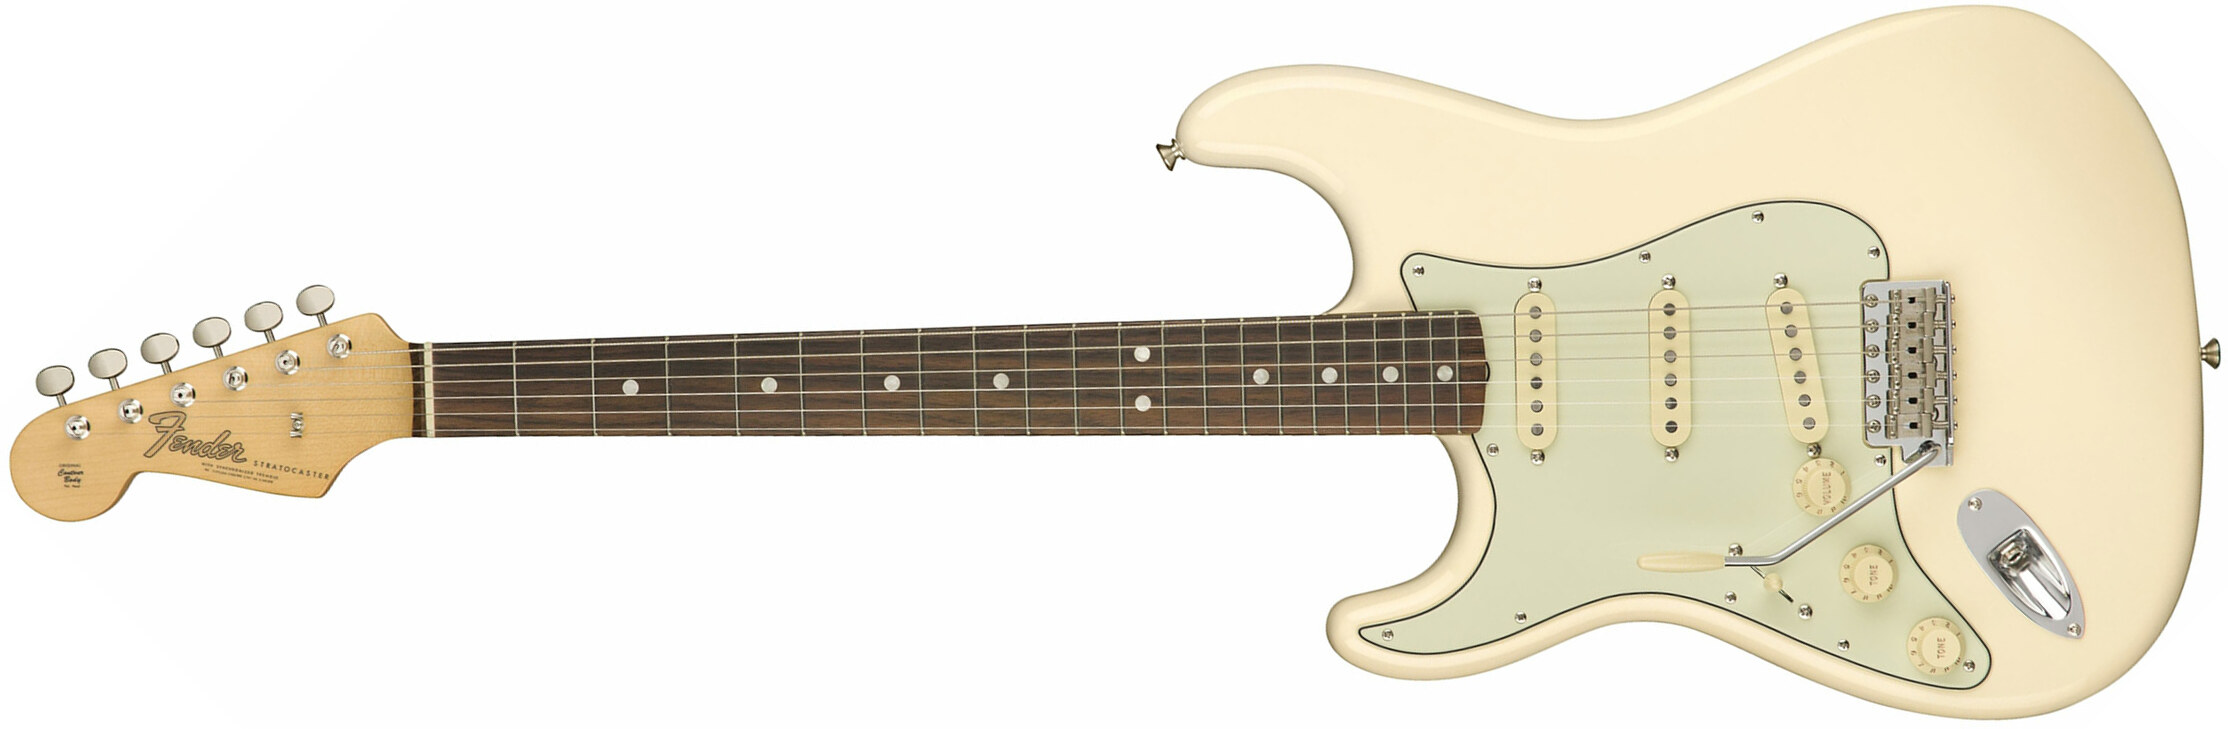 Fender Strat '60s Lh Gaucher American Original Usa Sss Rw - Olympic White - Left-handed electric guitar - Main picture